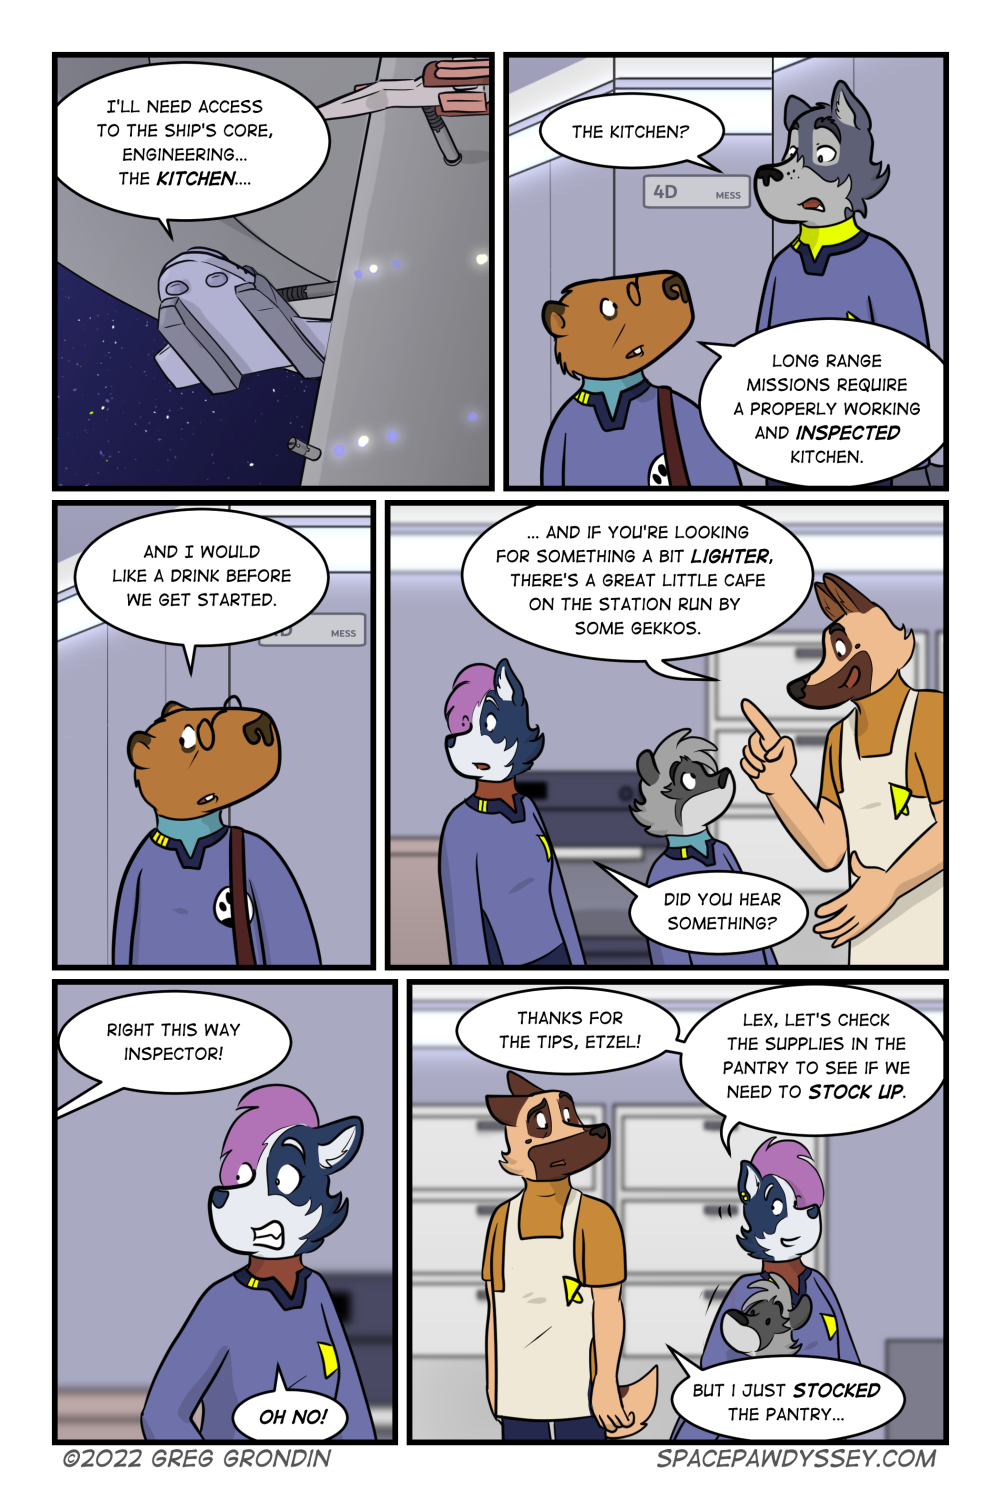 Space Pawdyssey #527